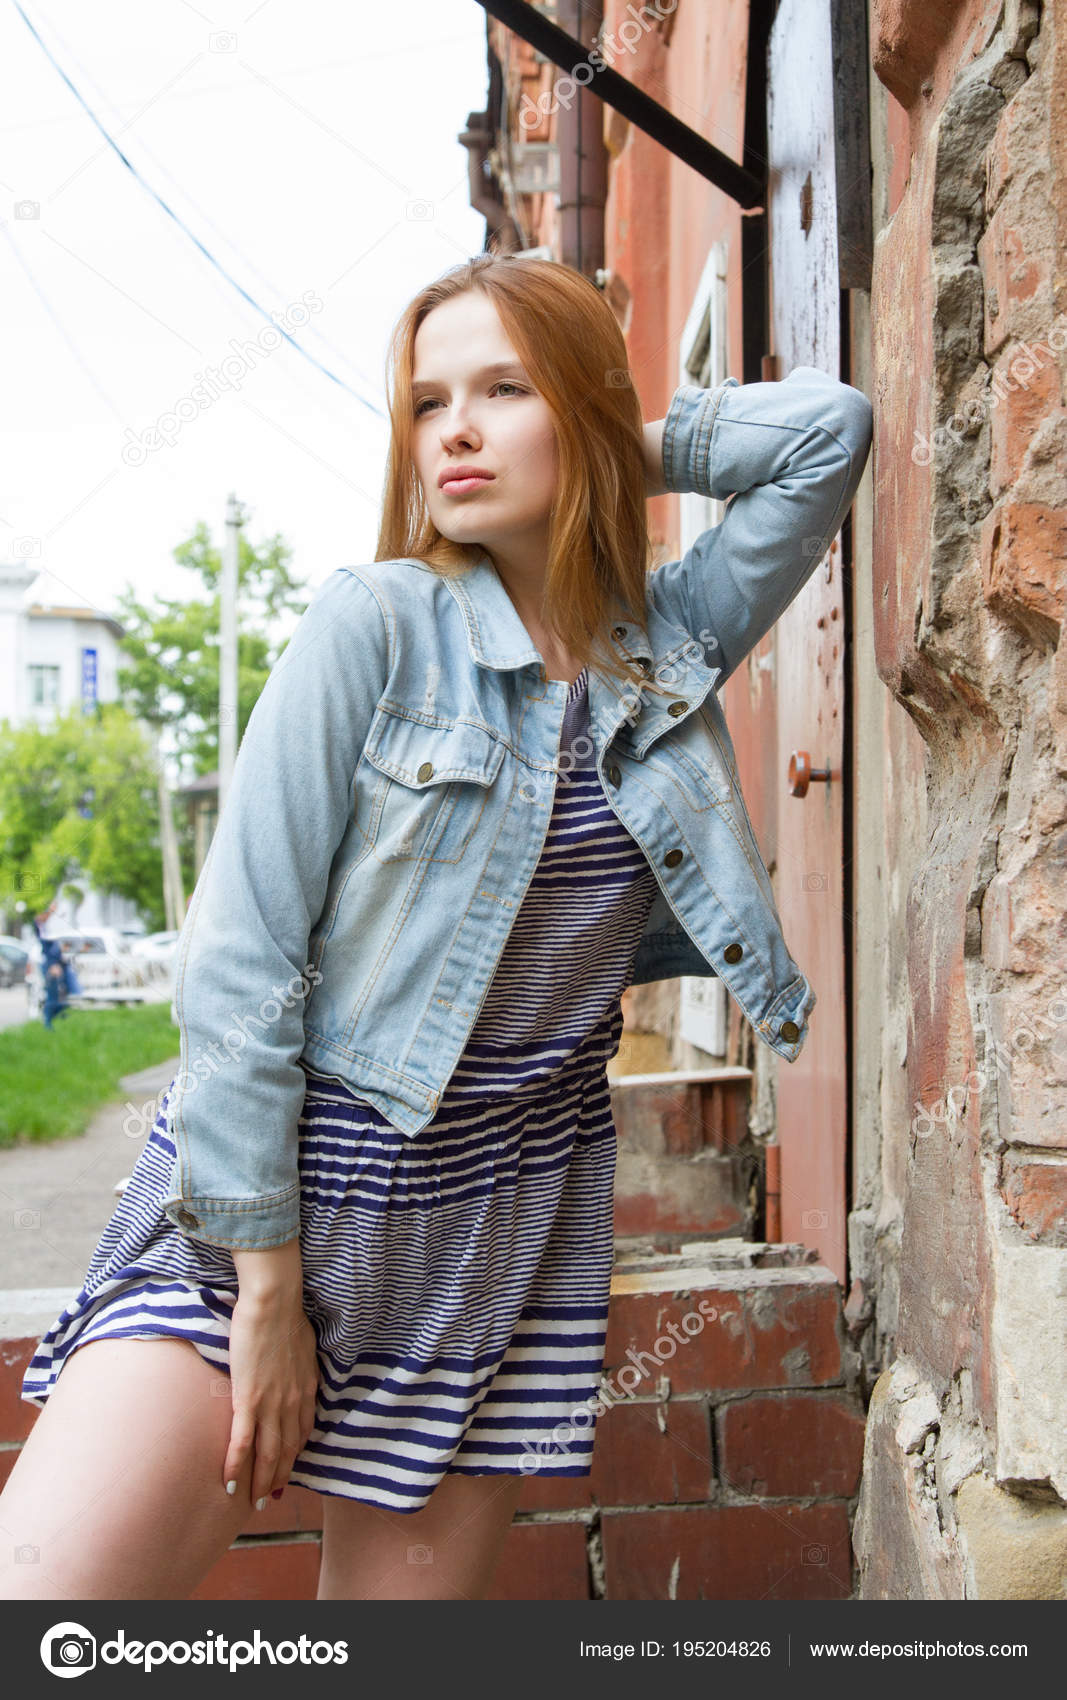 short dress with jean jacket